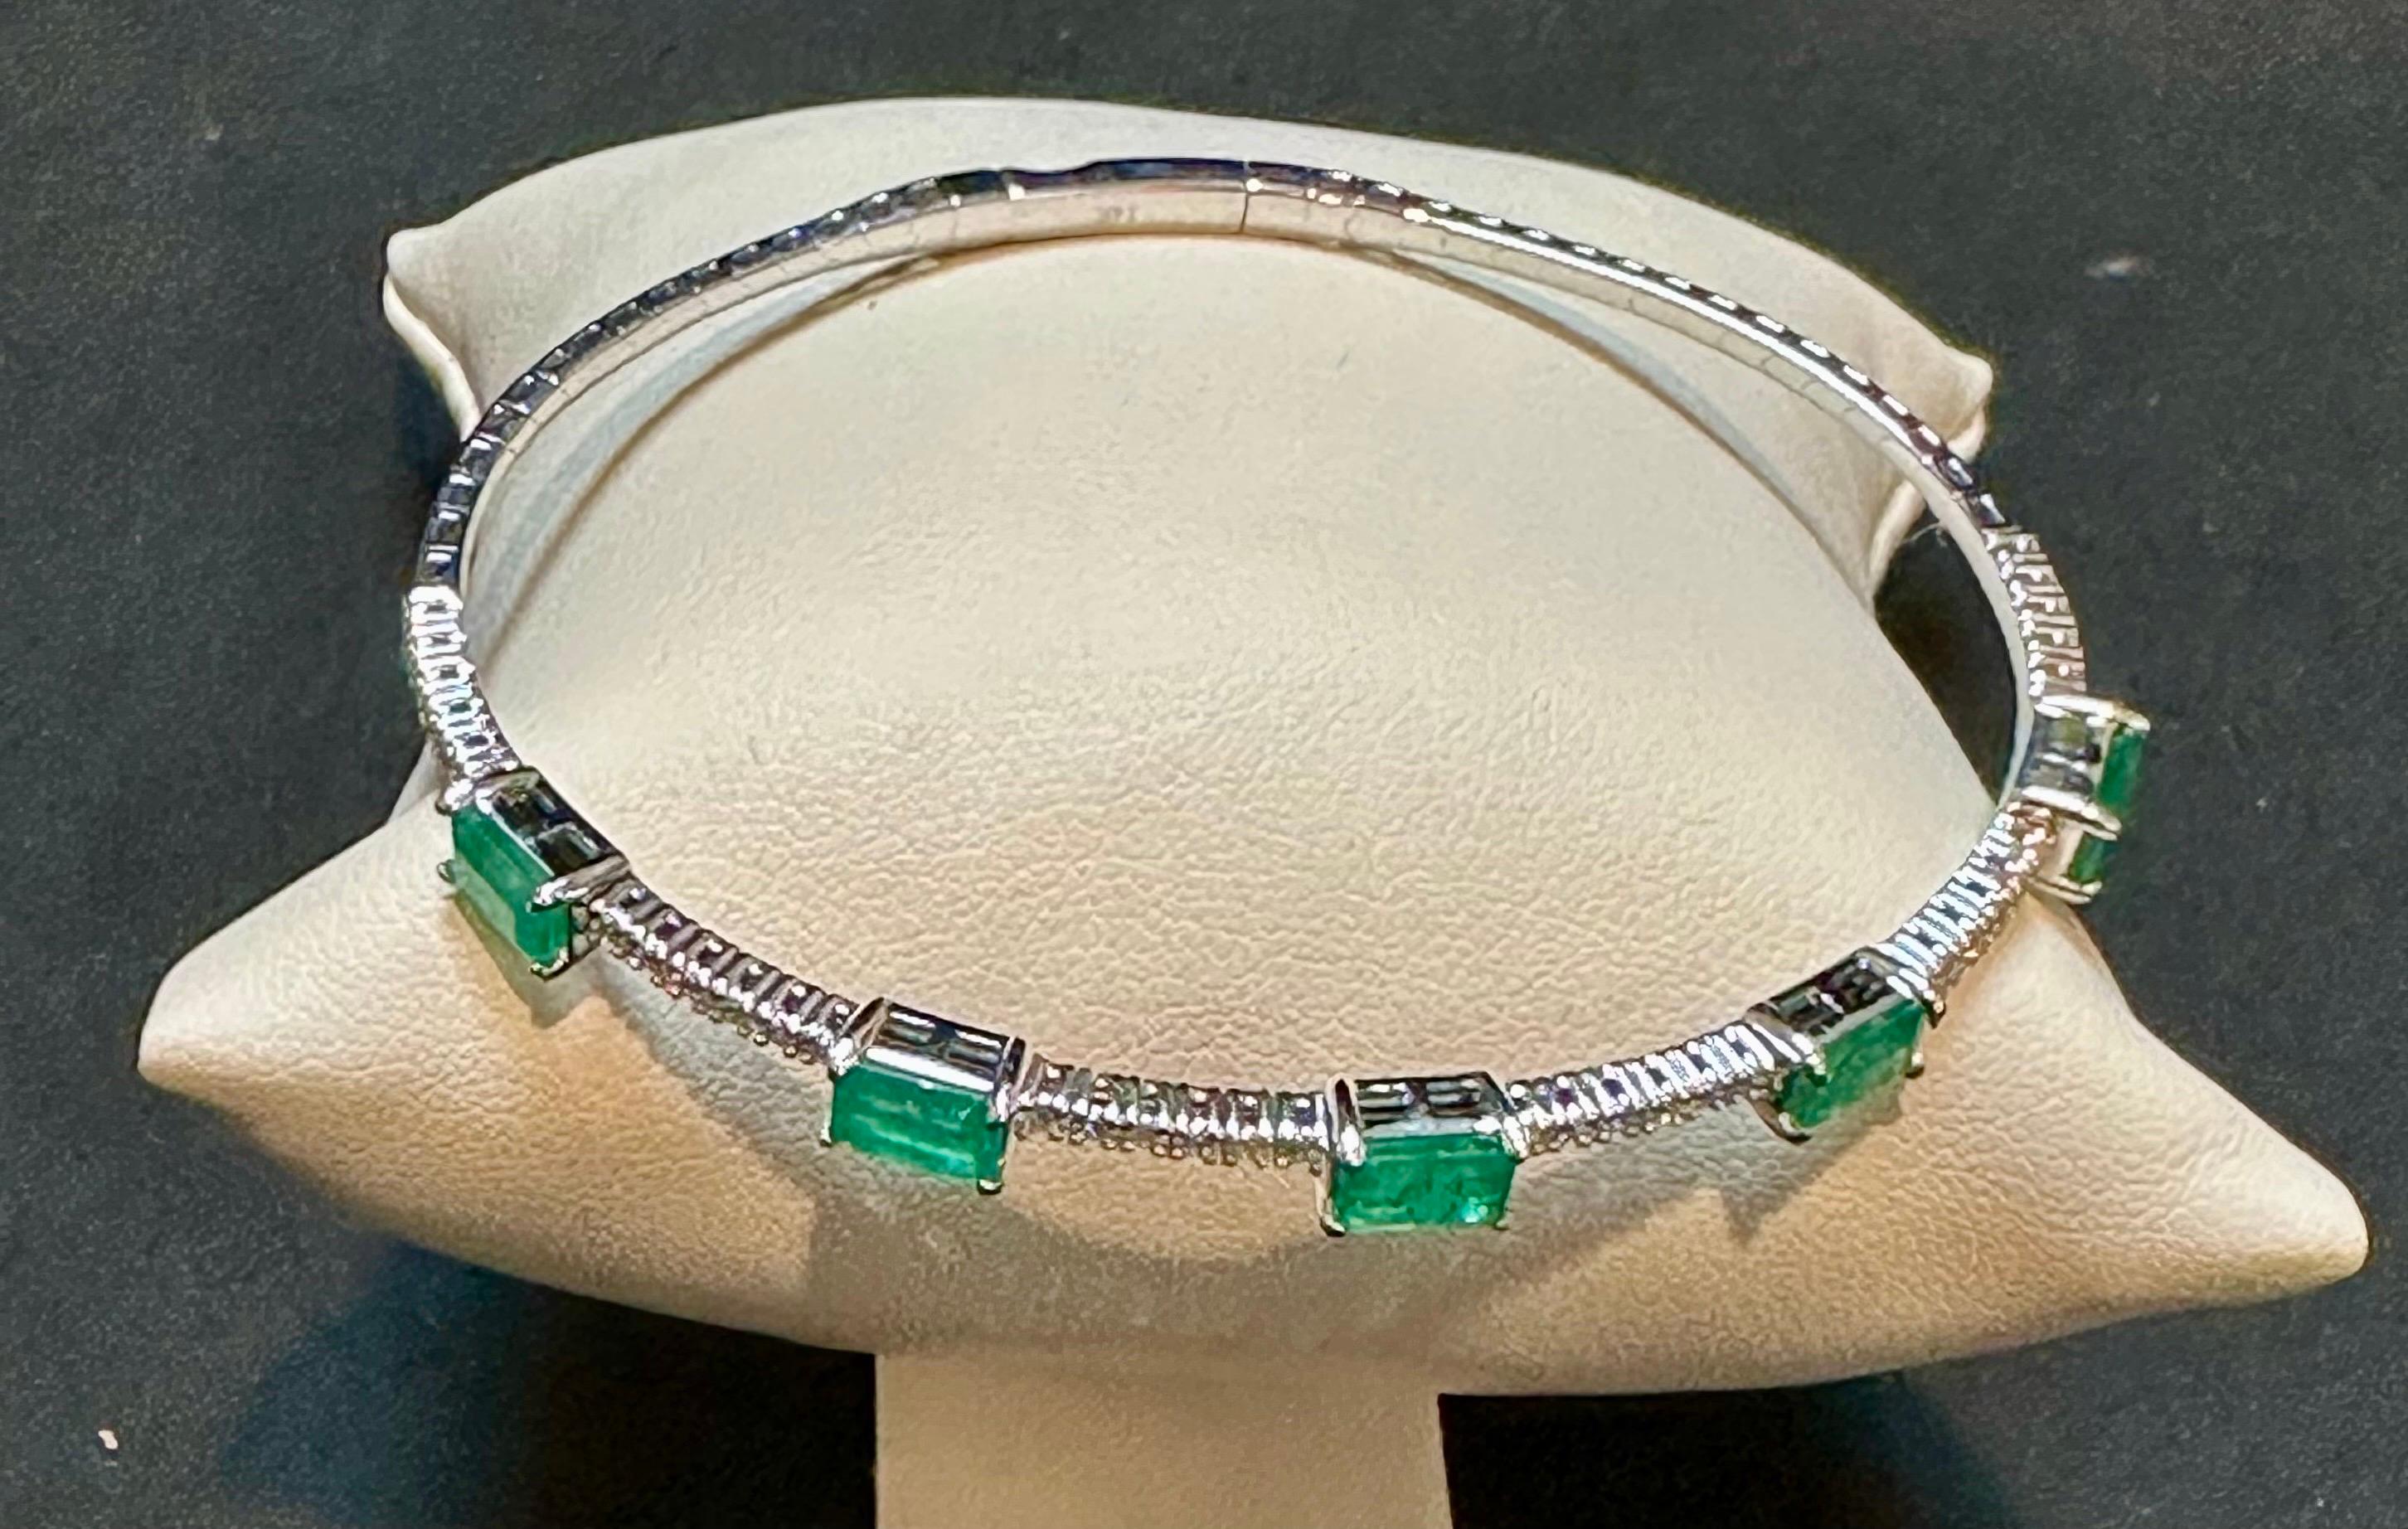 Introducing our exquisite 14 Karat Yellow Gold Bangle Bracelet adorned with approximately 3 carats of Natural Brazilian Emeralds and sparkling diamonds. This bangle bracelet showcases five emerald-cut emeralds, each meticulously separated by a row